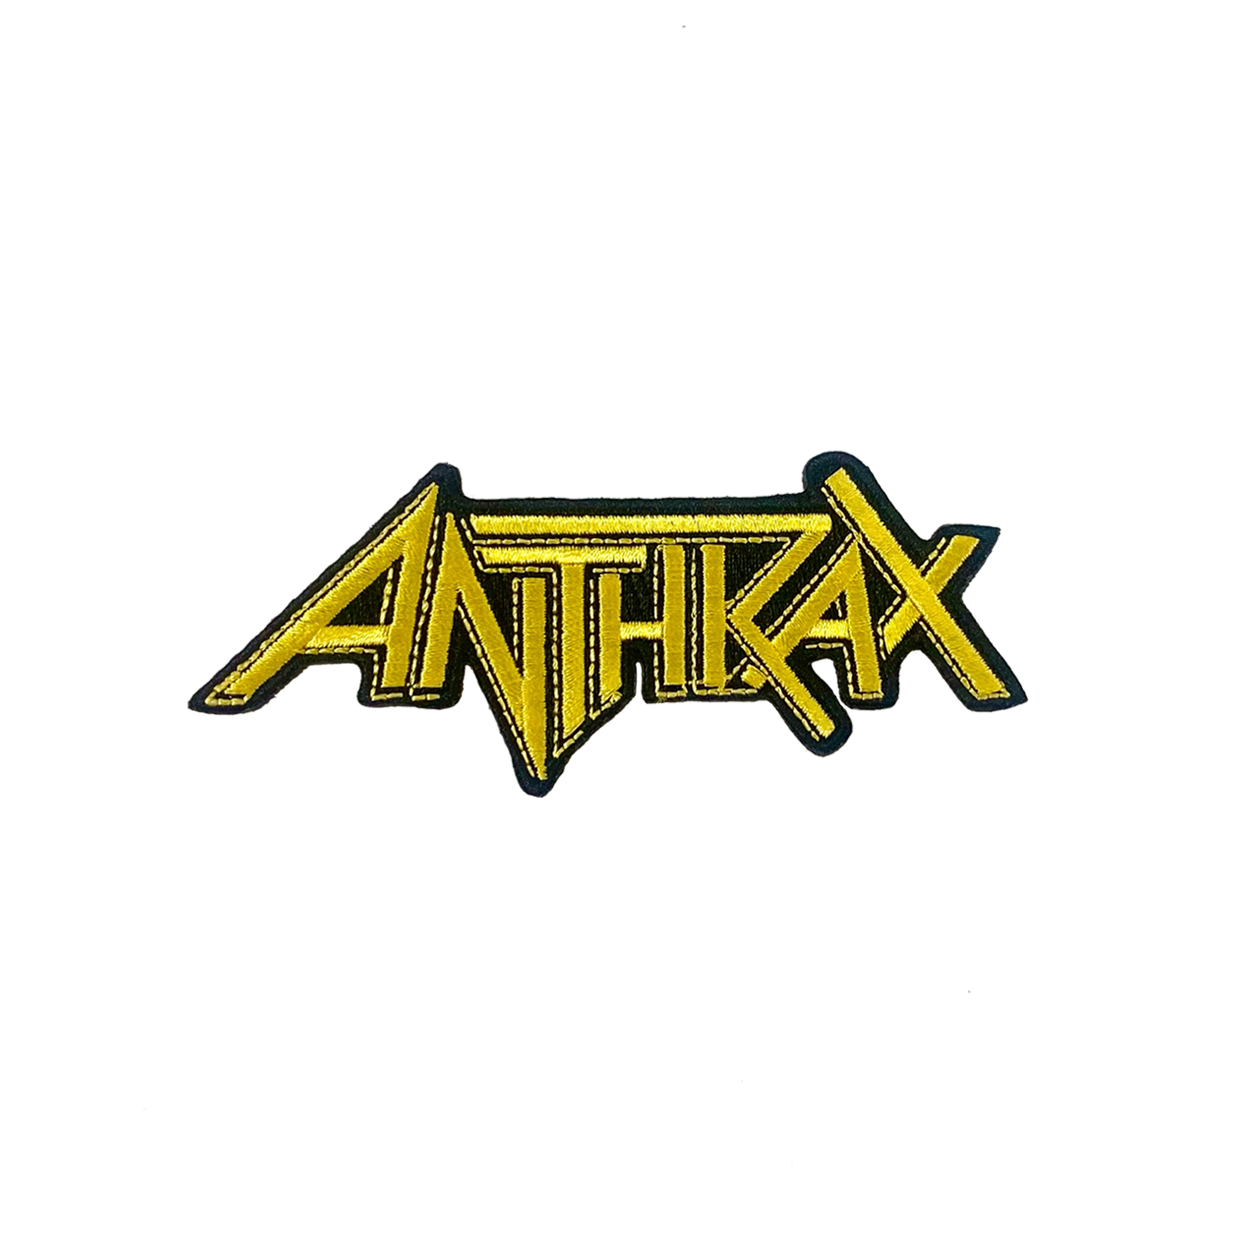 ANTHRAX LOGO EMBROIDERED PATCH